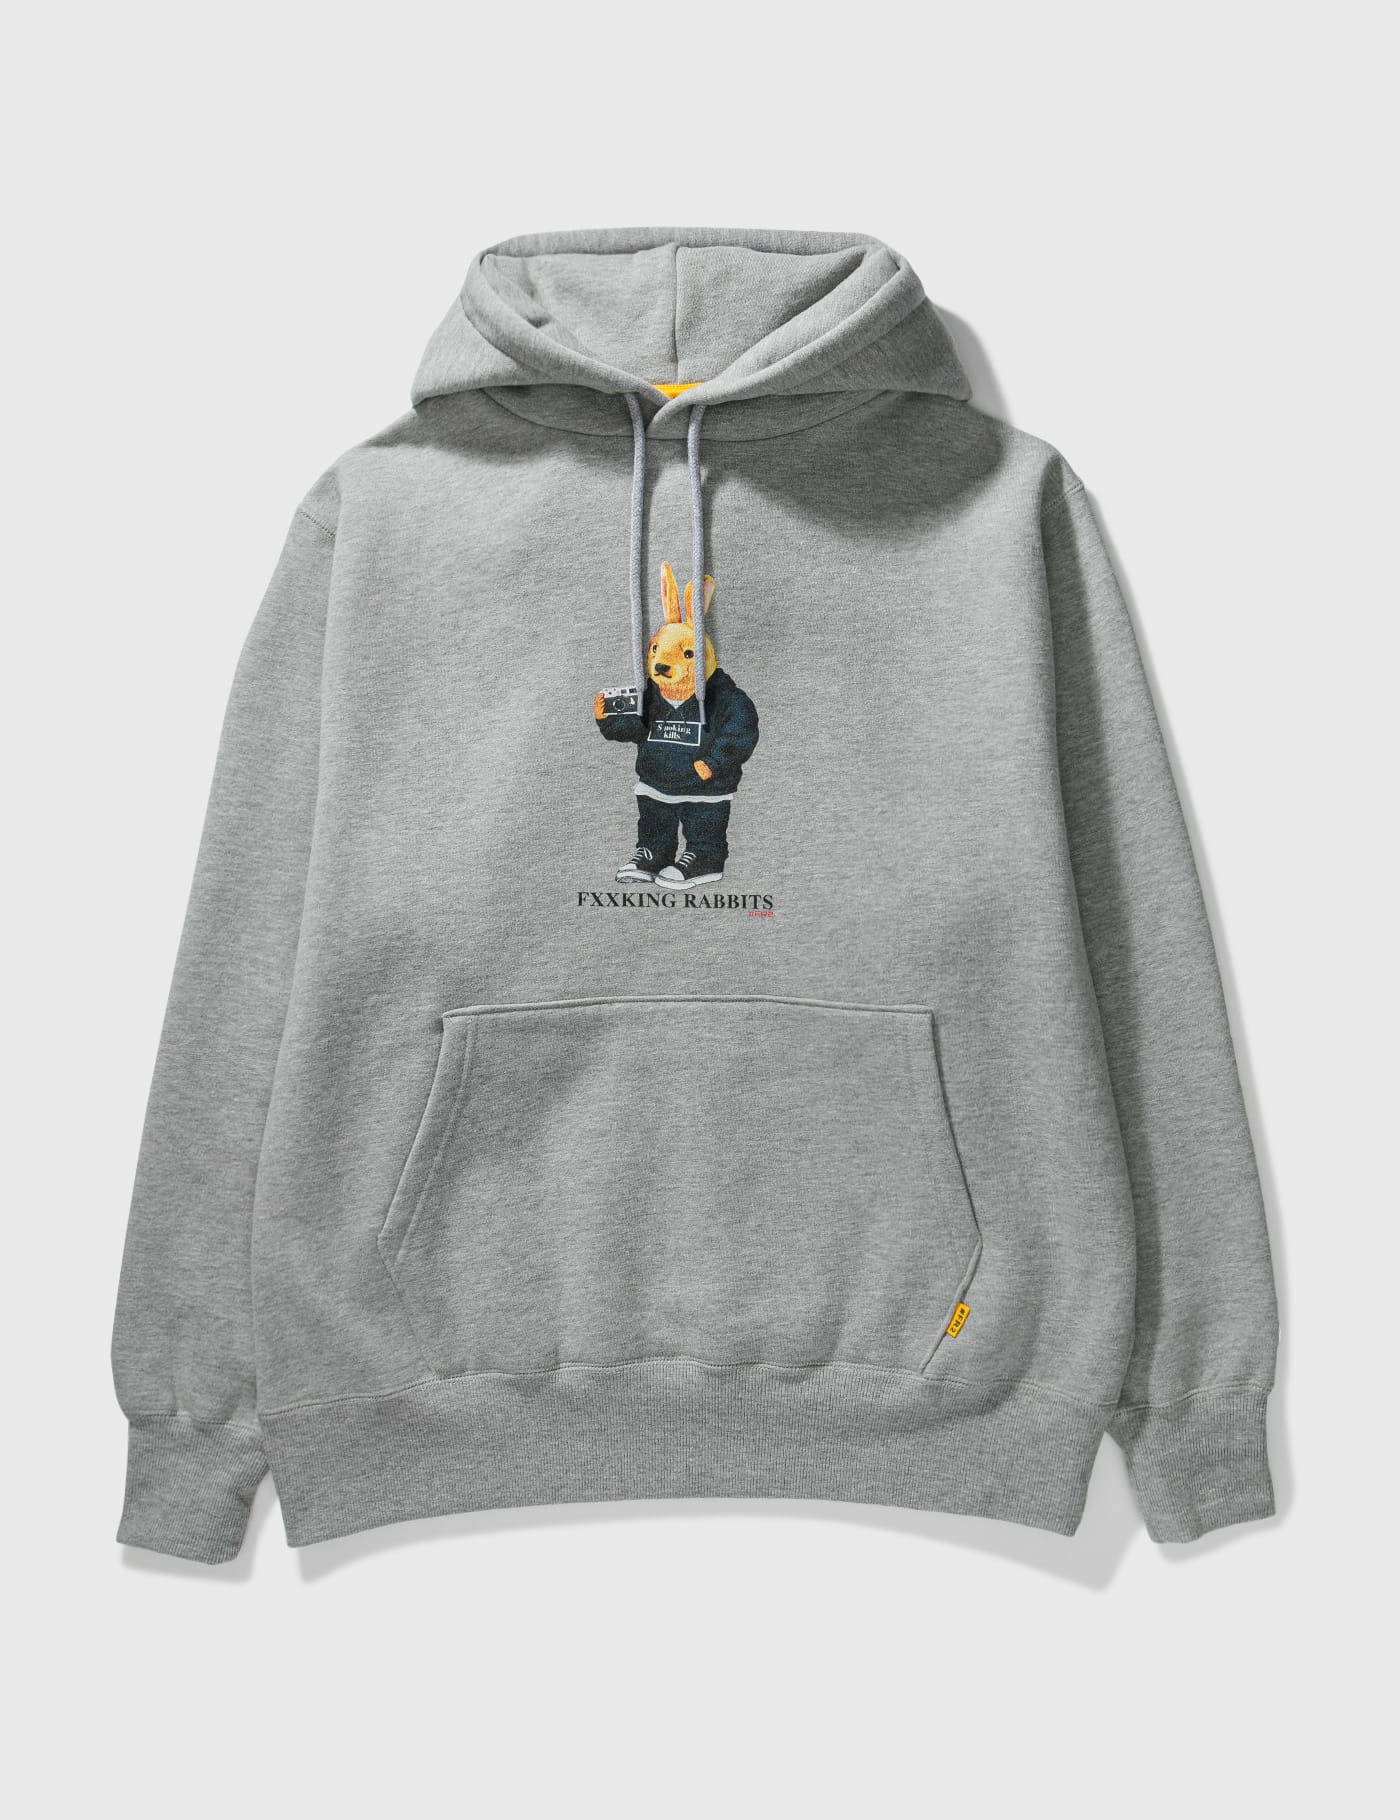 FR2 - Mascot Hoodie | HBX - Globally Curated Fashion and Lifestyle